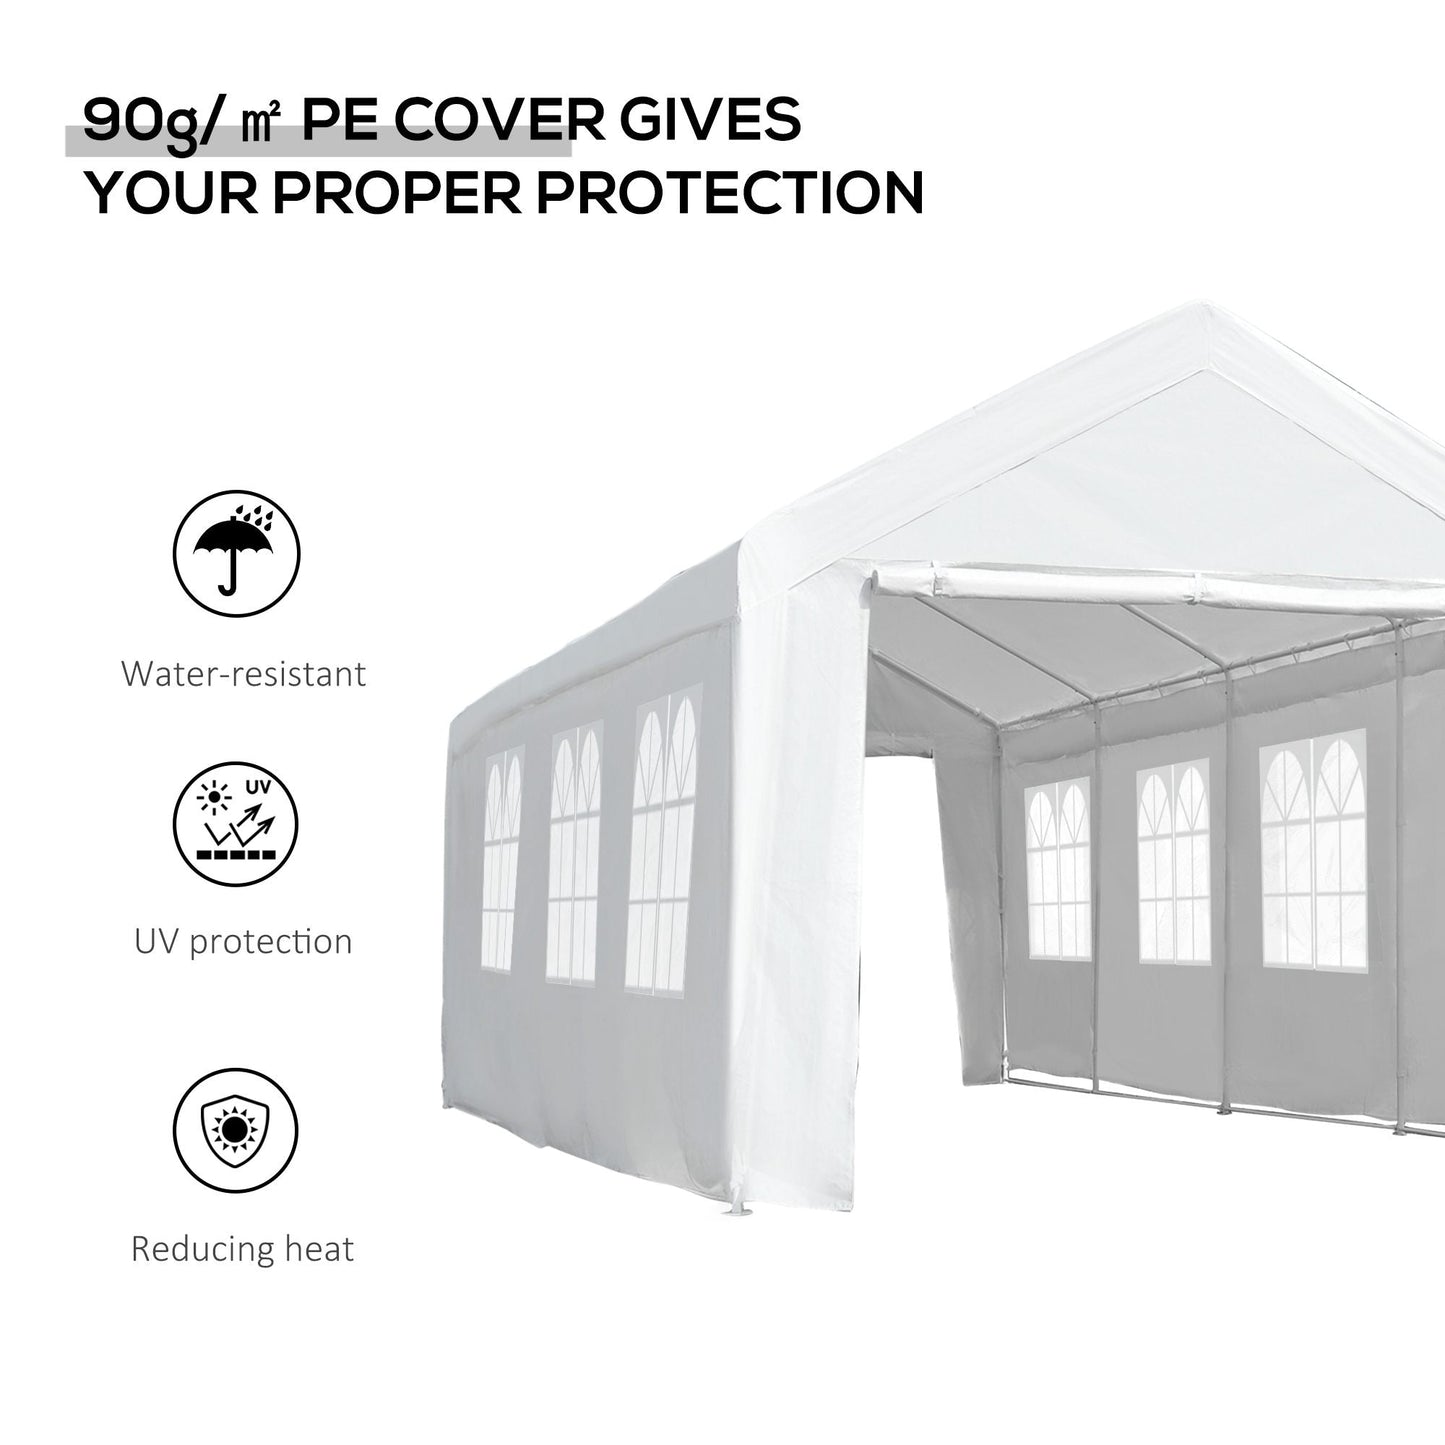 10 x 30ft Heavy Duty Party Tent Gazebo Carport Camping Canopy (10 x 30ft) with Removable Sidewalls White at Gallery Canada